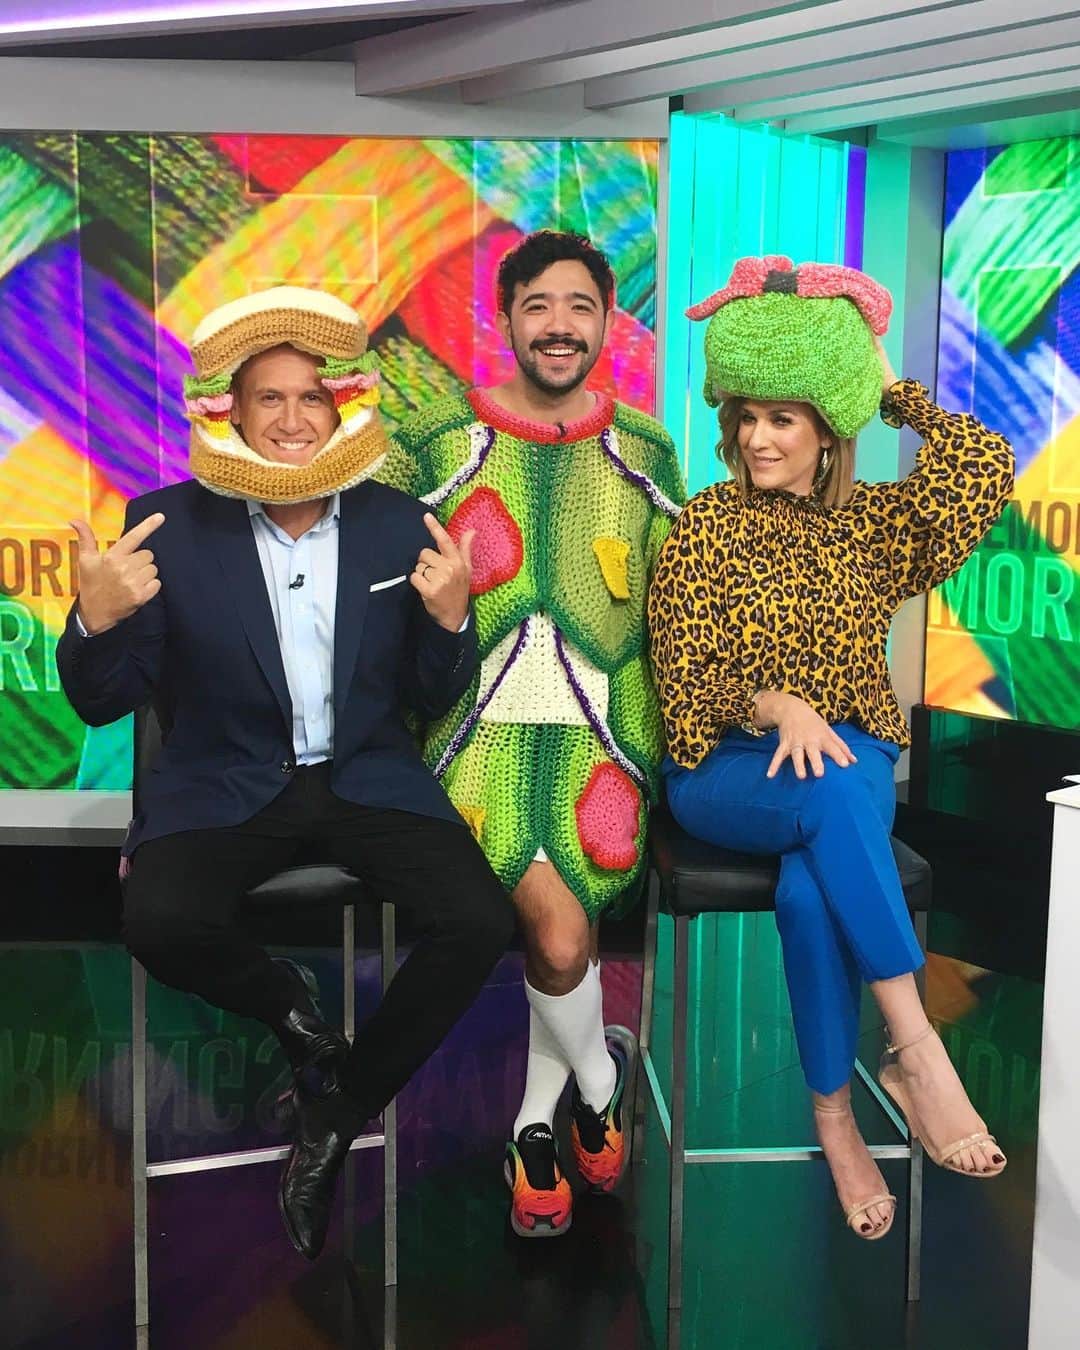 Phil Fergusonのインスタグラム：「Closing out my @sydneymardigras popping into @morningshowon7 before going home!  Thanks everyone I saw and met this weekend, was definitely different to the last 5 years but now I’m sad to go home!  Also thanks to the crew @Instagram for having me up and on the float once again, really appreciate it!  Hope you’re all well!」